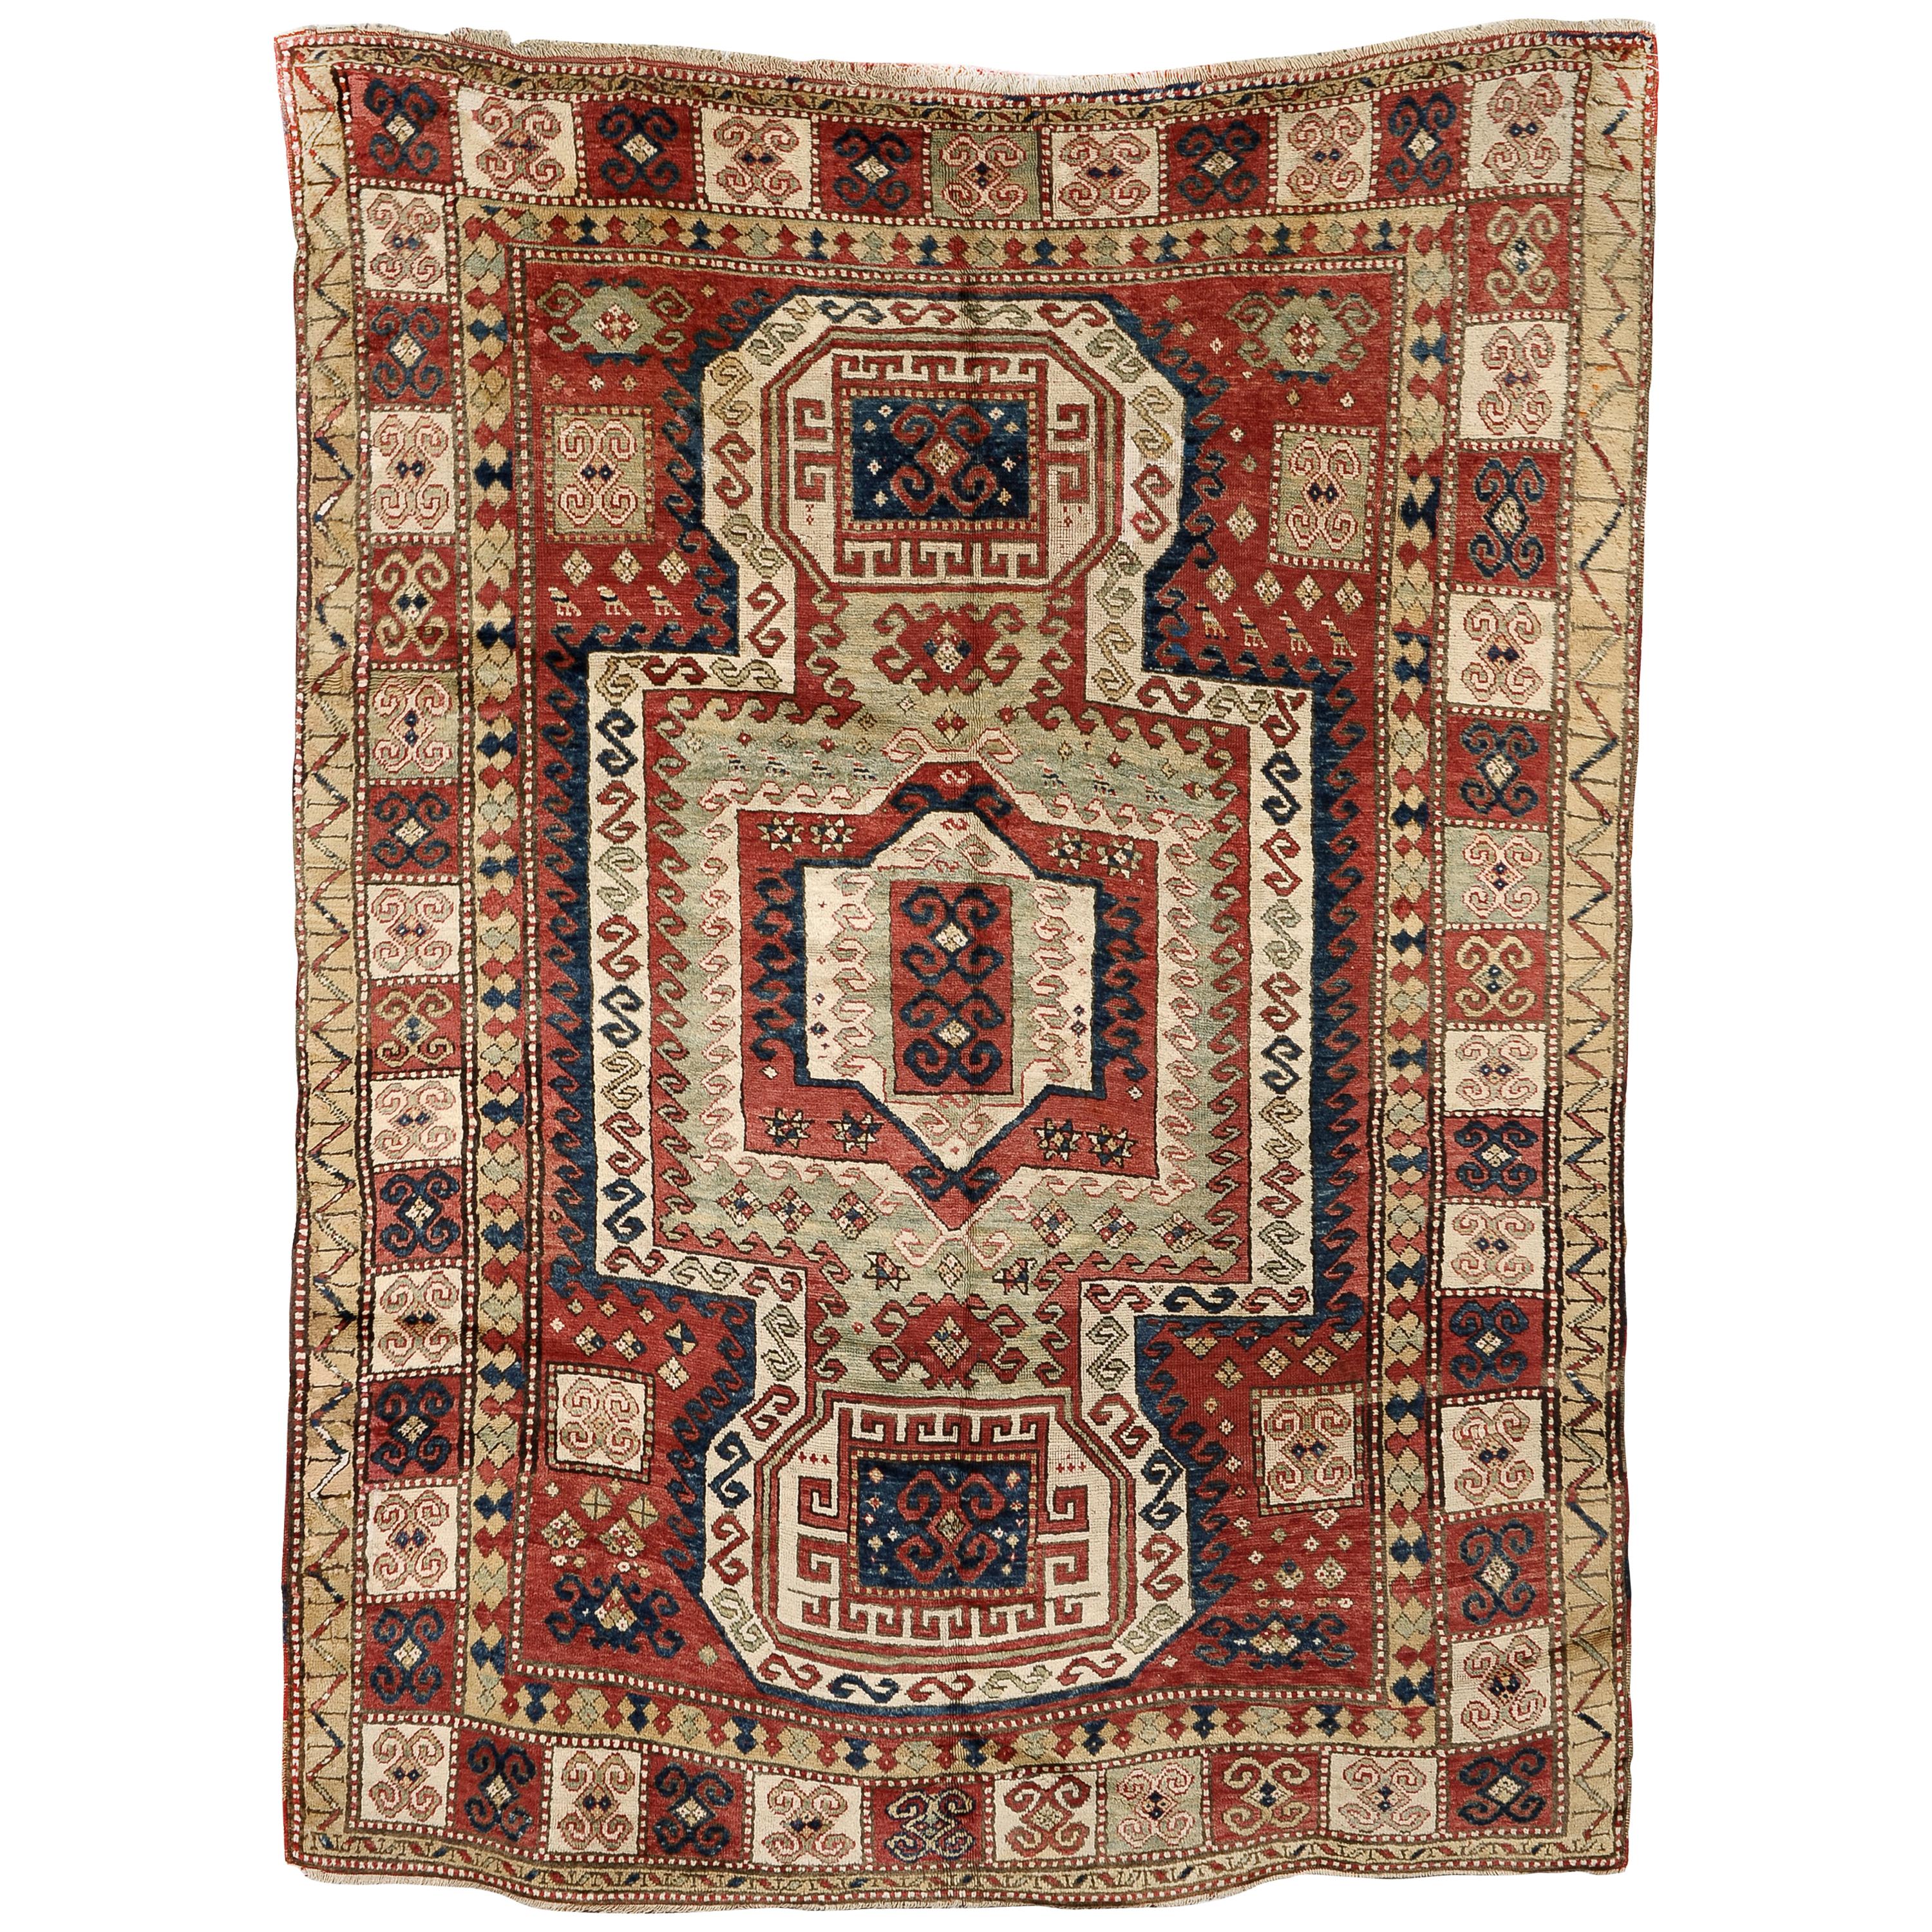 Early 19th Century, Red Field, Ivory, Blue and Green, Caucasian Sevan Kazak Rug For Sale